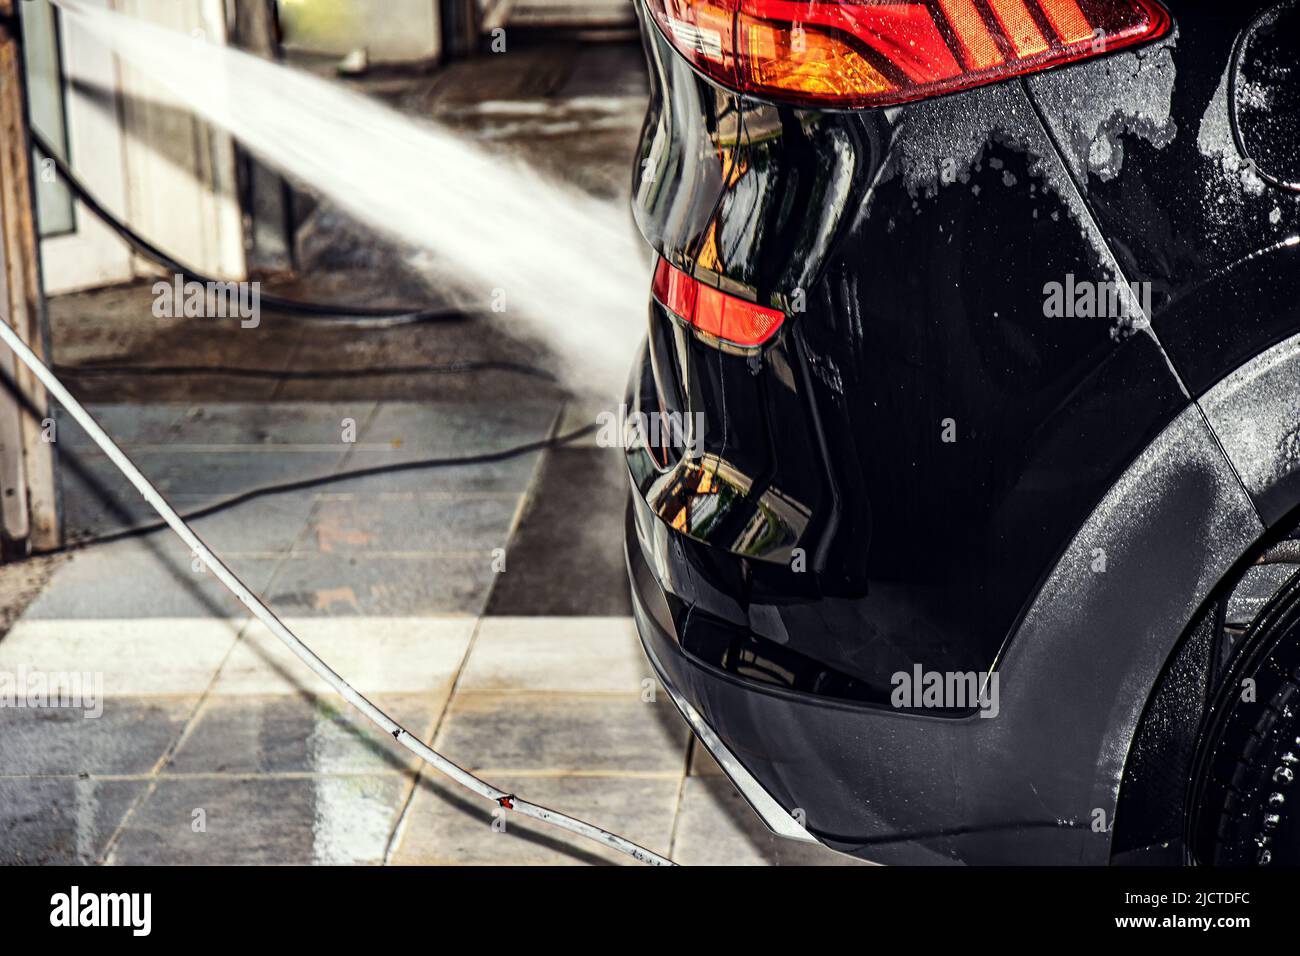 woman washing car with pressure washer at self-service car wash station,  selective focus Stock Photo - Alamy